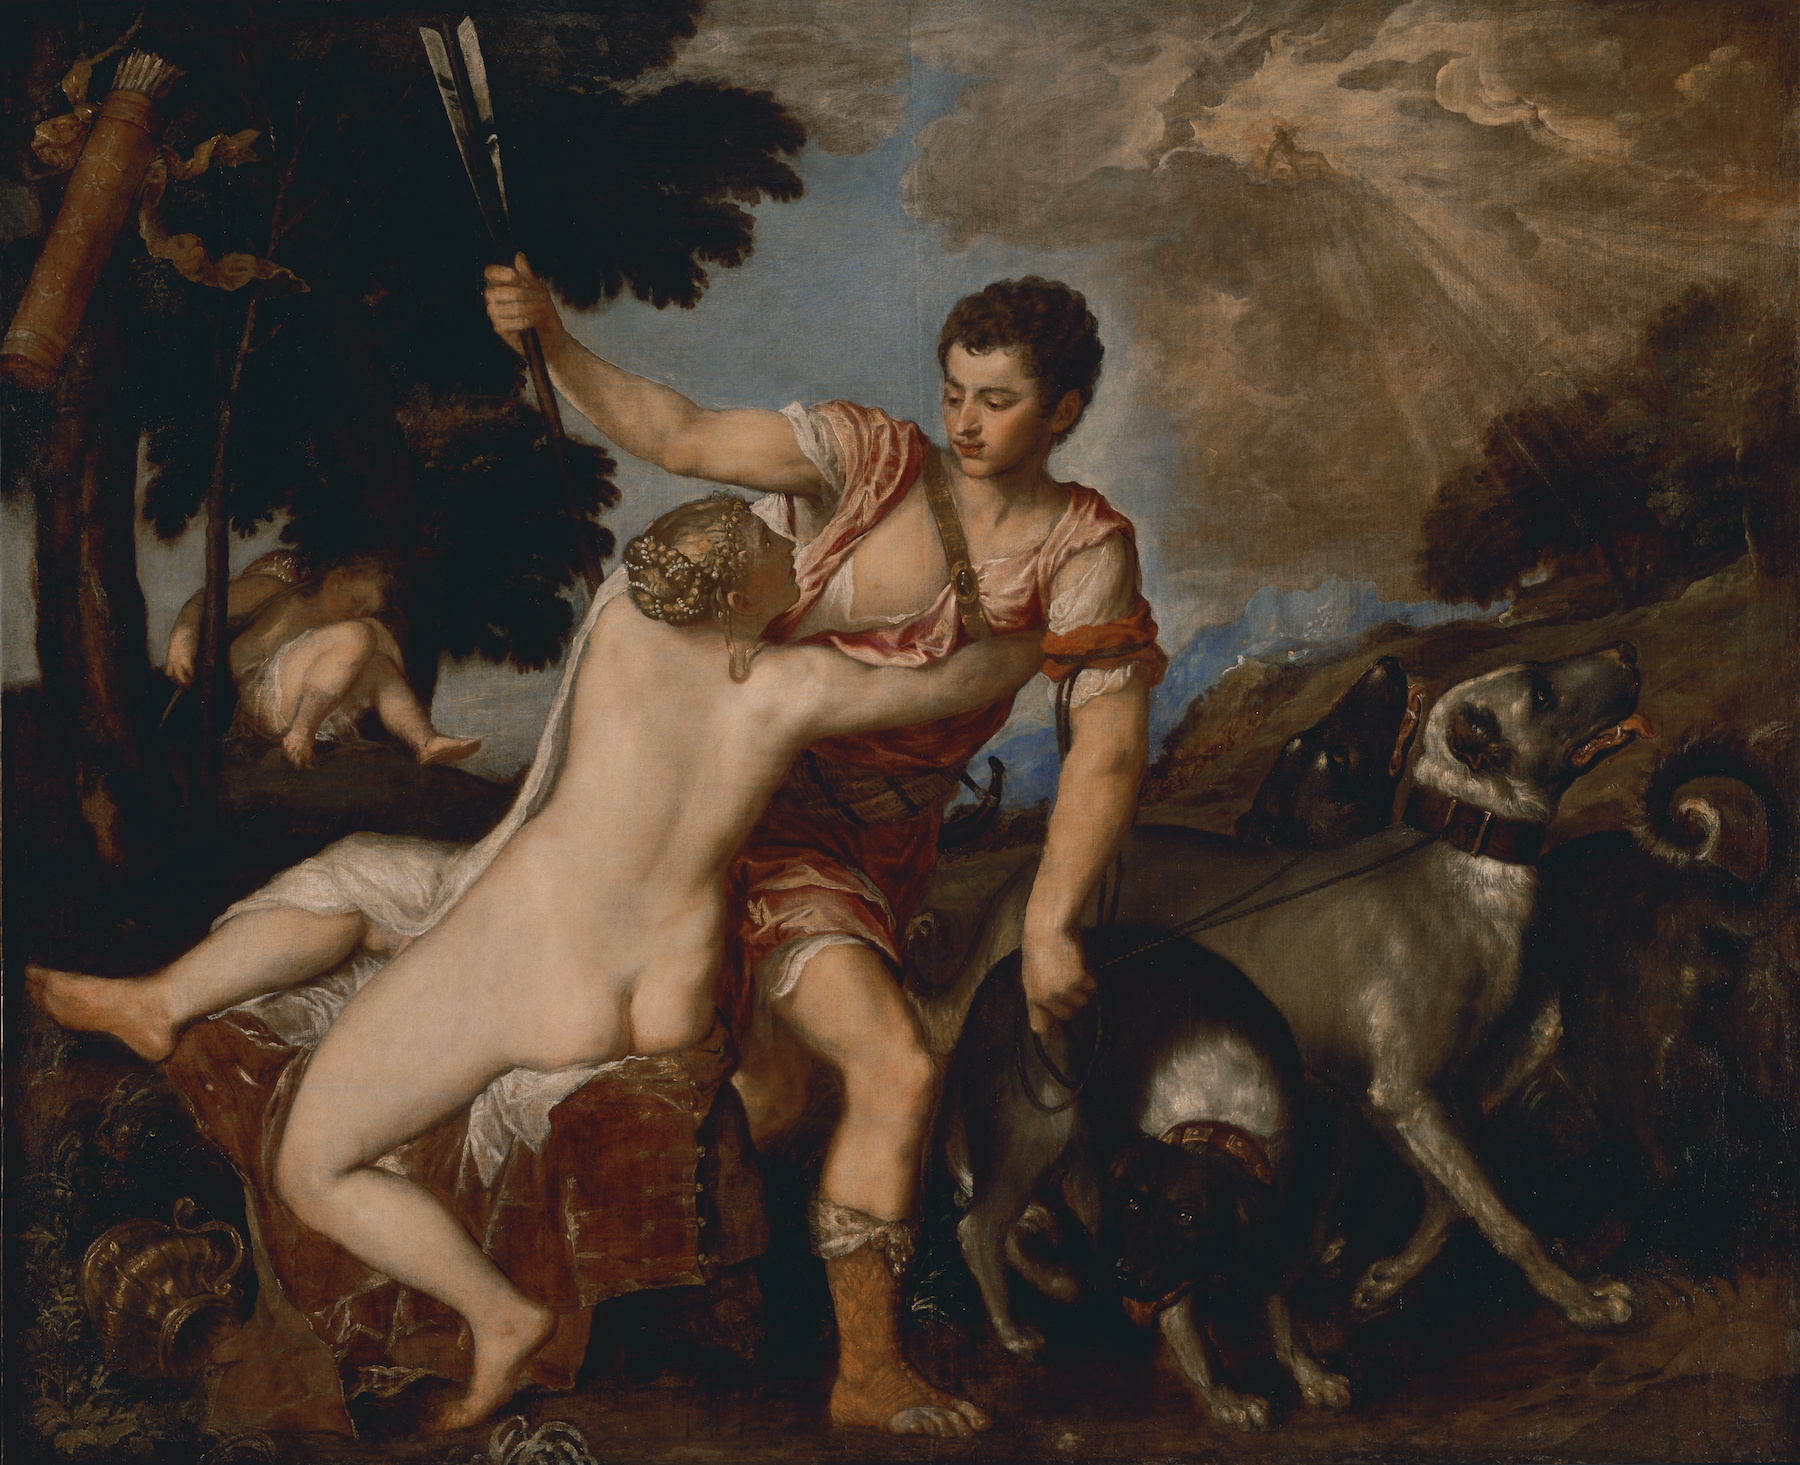 Venus and Adonis by  Titian - about 1555 - 1560 - 160 × 196.5 cm J. Paul Getty Museum